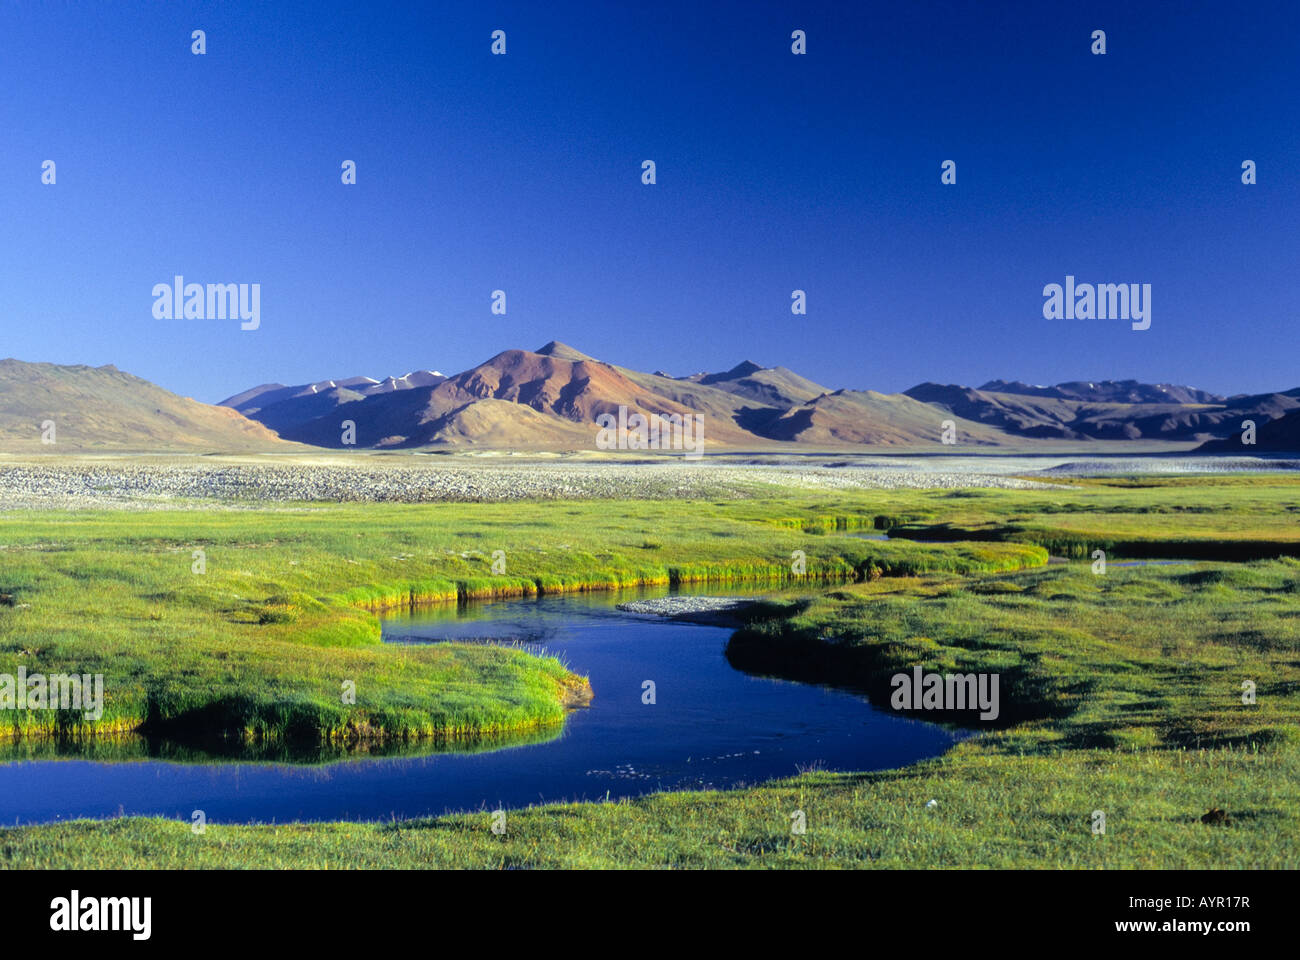 Meandering offshoot of Lake Kar Tso, grassy plateau and snow-covered peaks at over 4900 metres, Himalayas, Ladakh, India Stock Photo